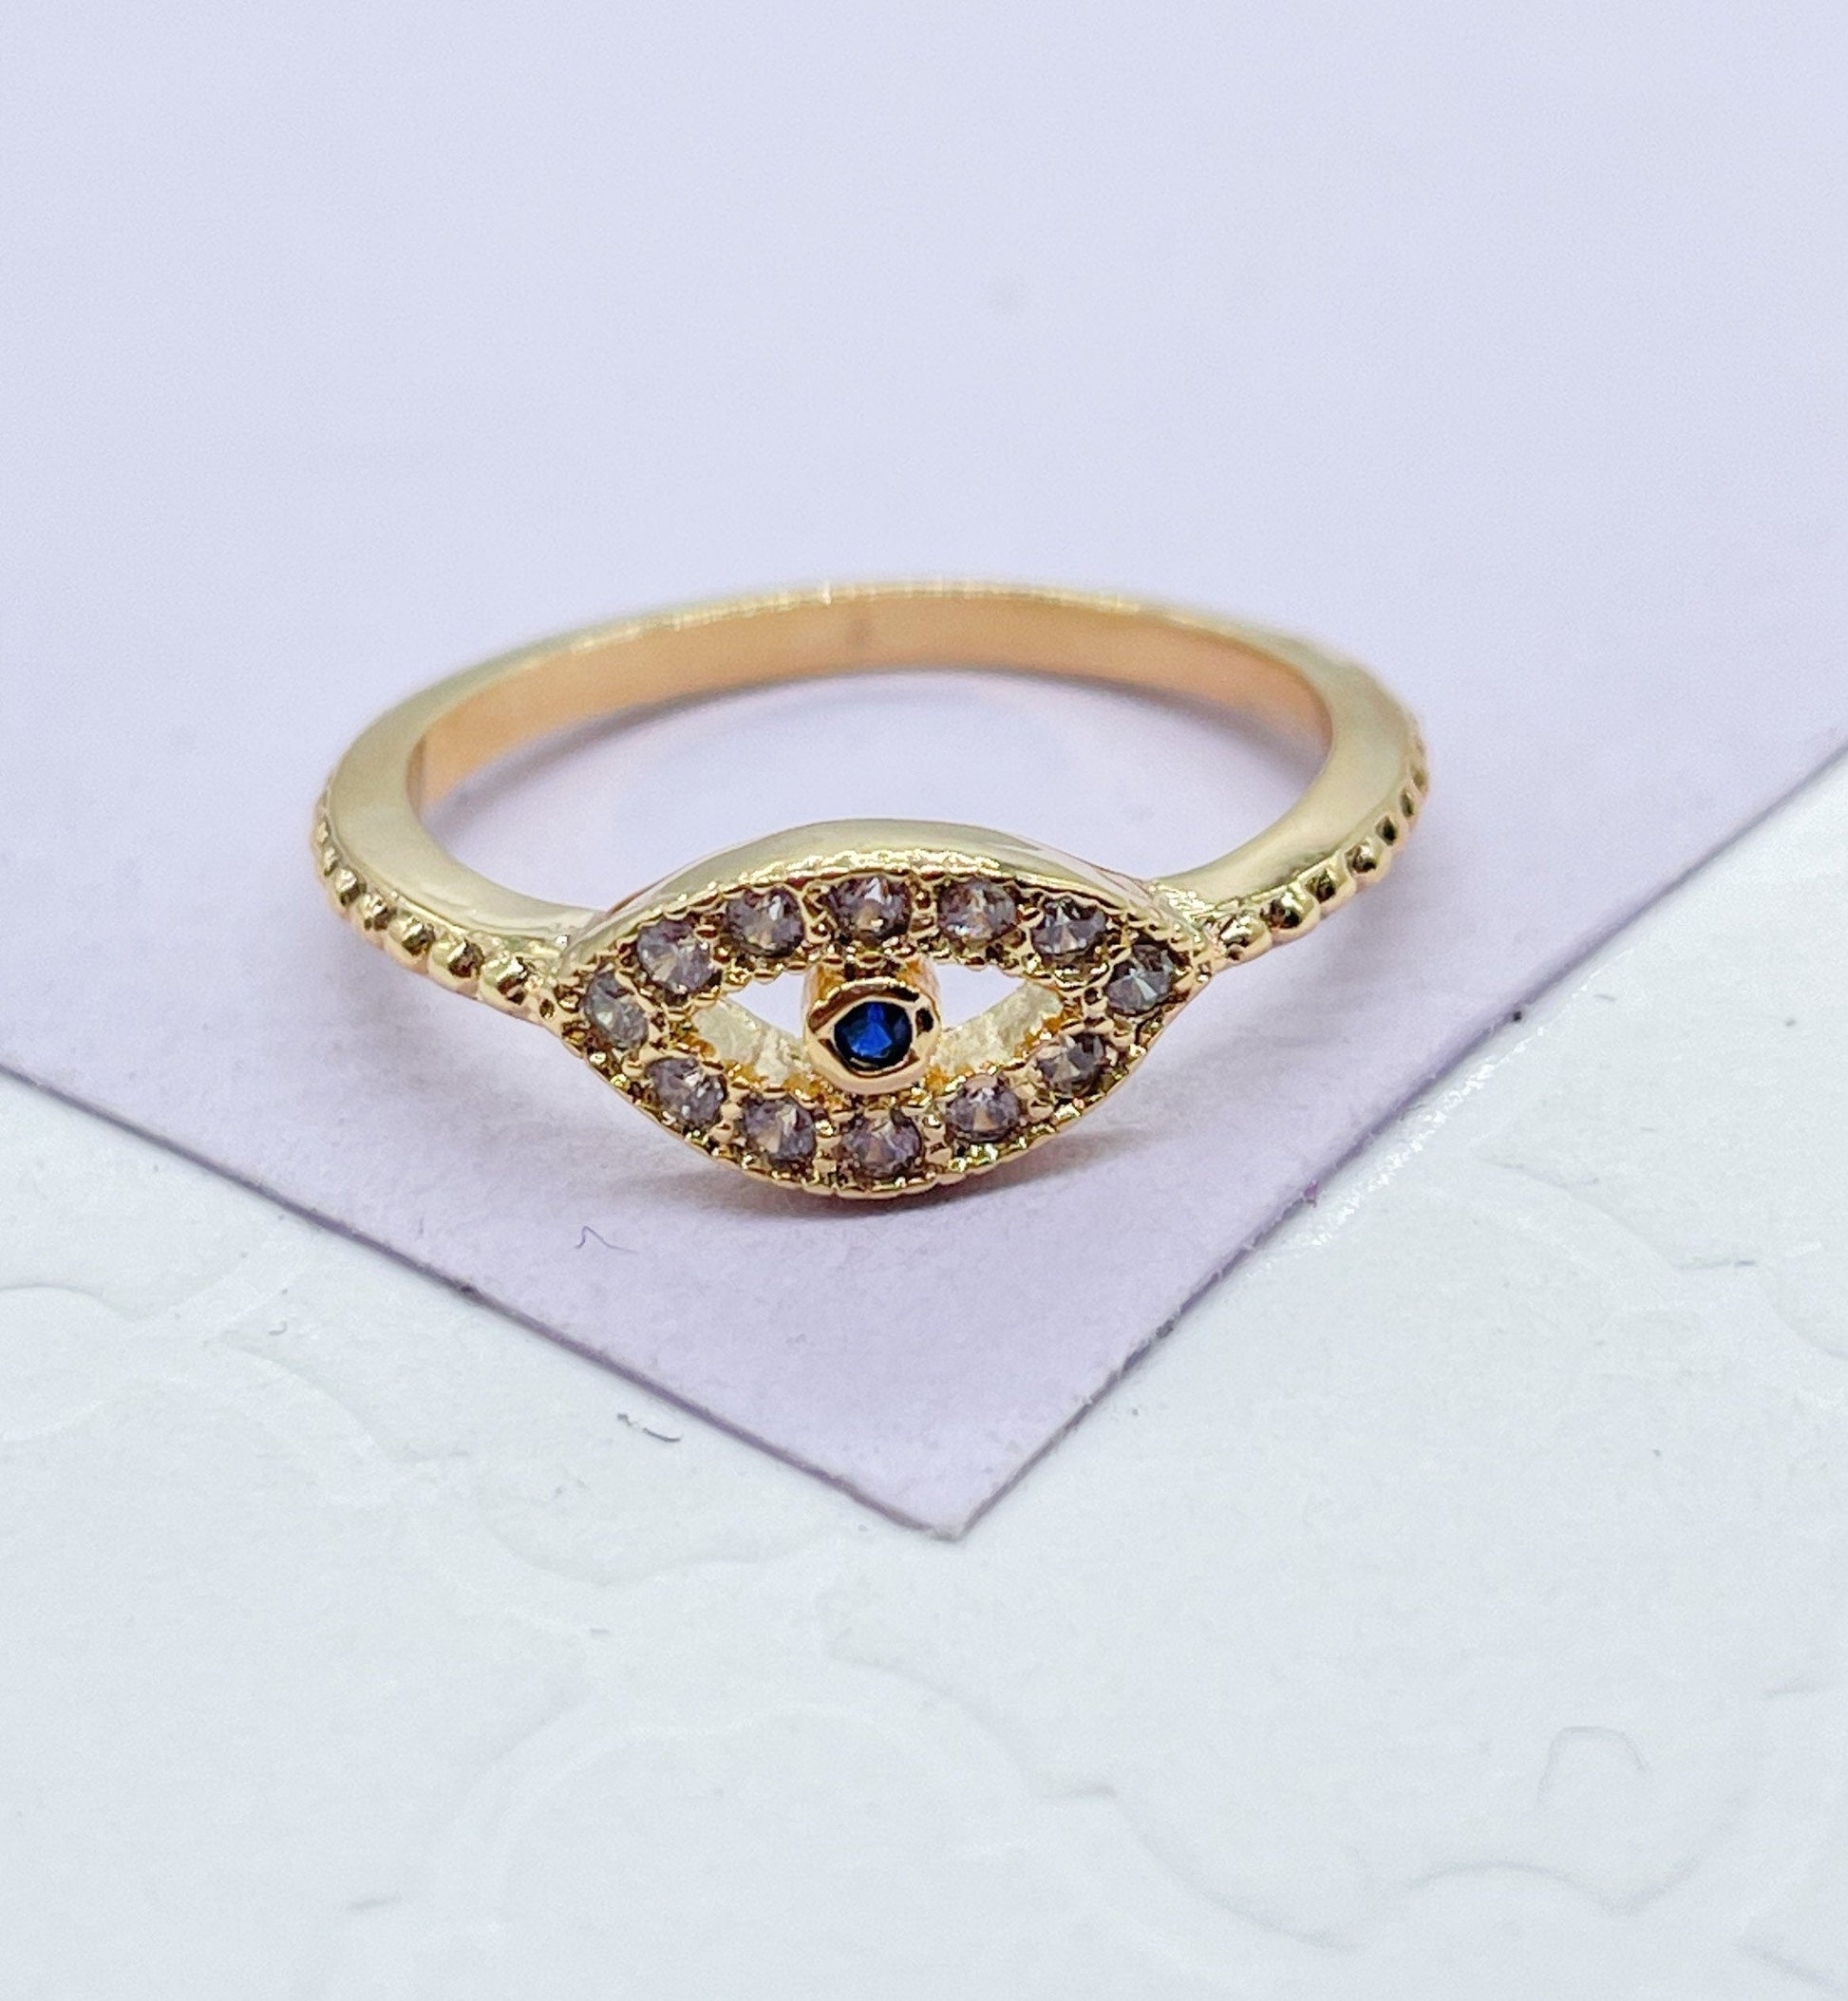 18k Gold Filled Pave Evil Eye Ring With Blue Stone Center